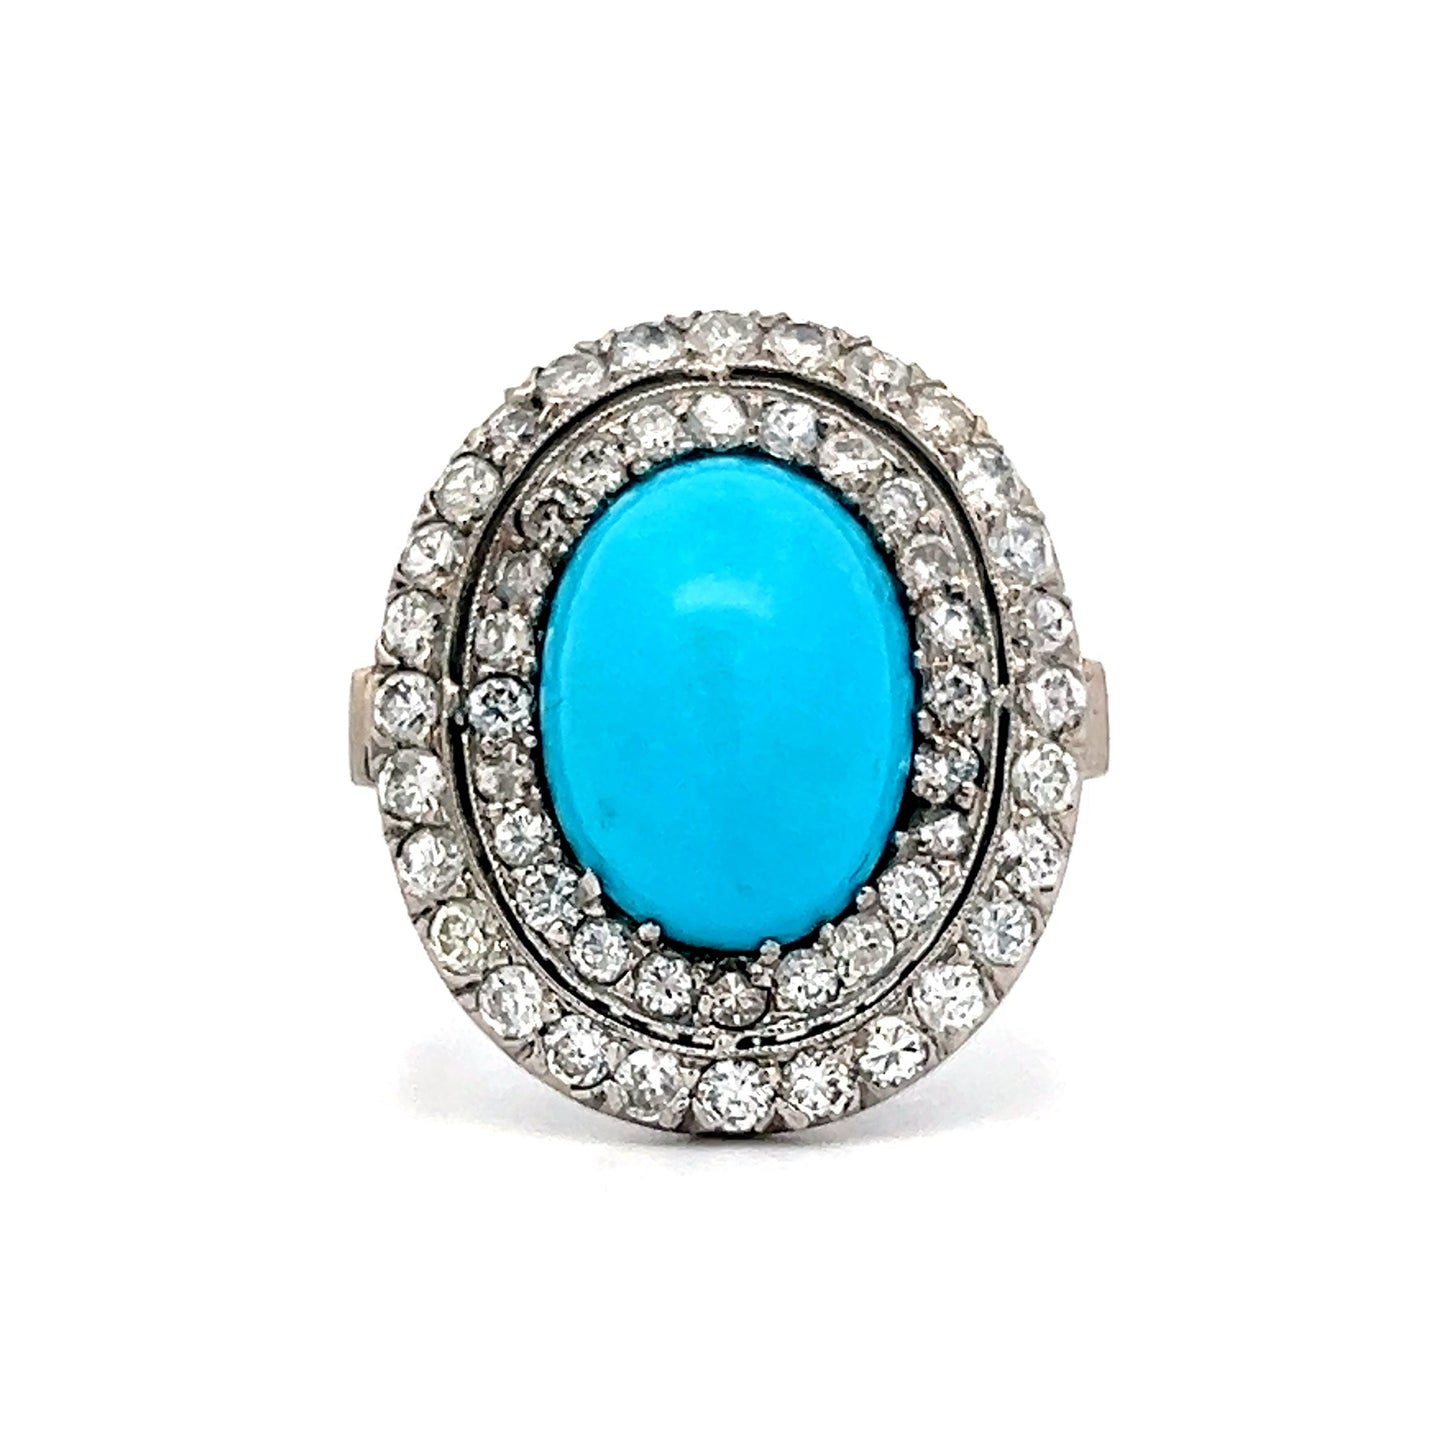 4.91 Vintage Turquoise Double Halo Cocktail Ring in Palladium